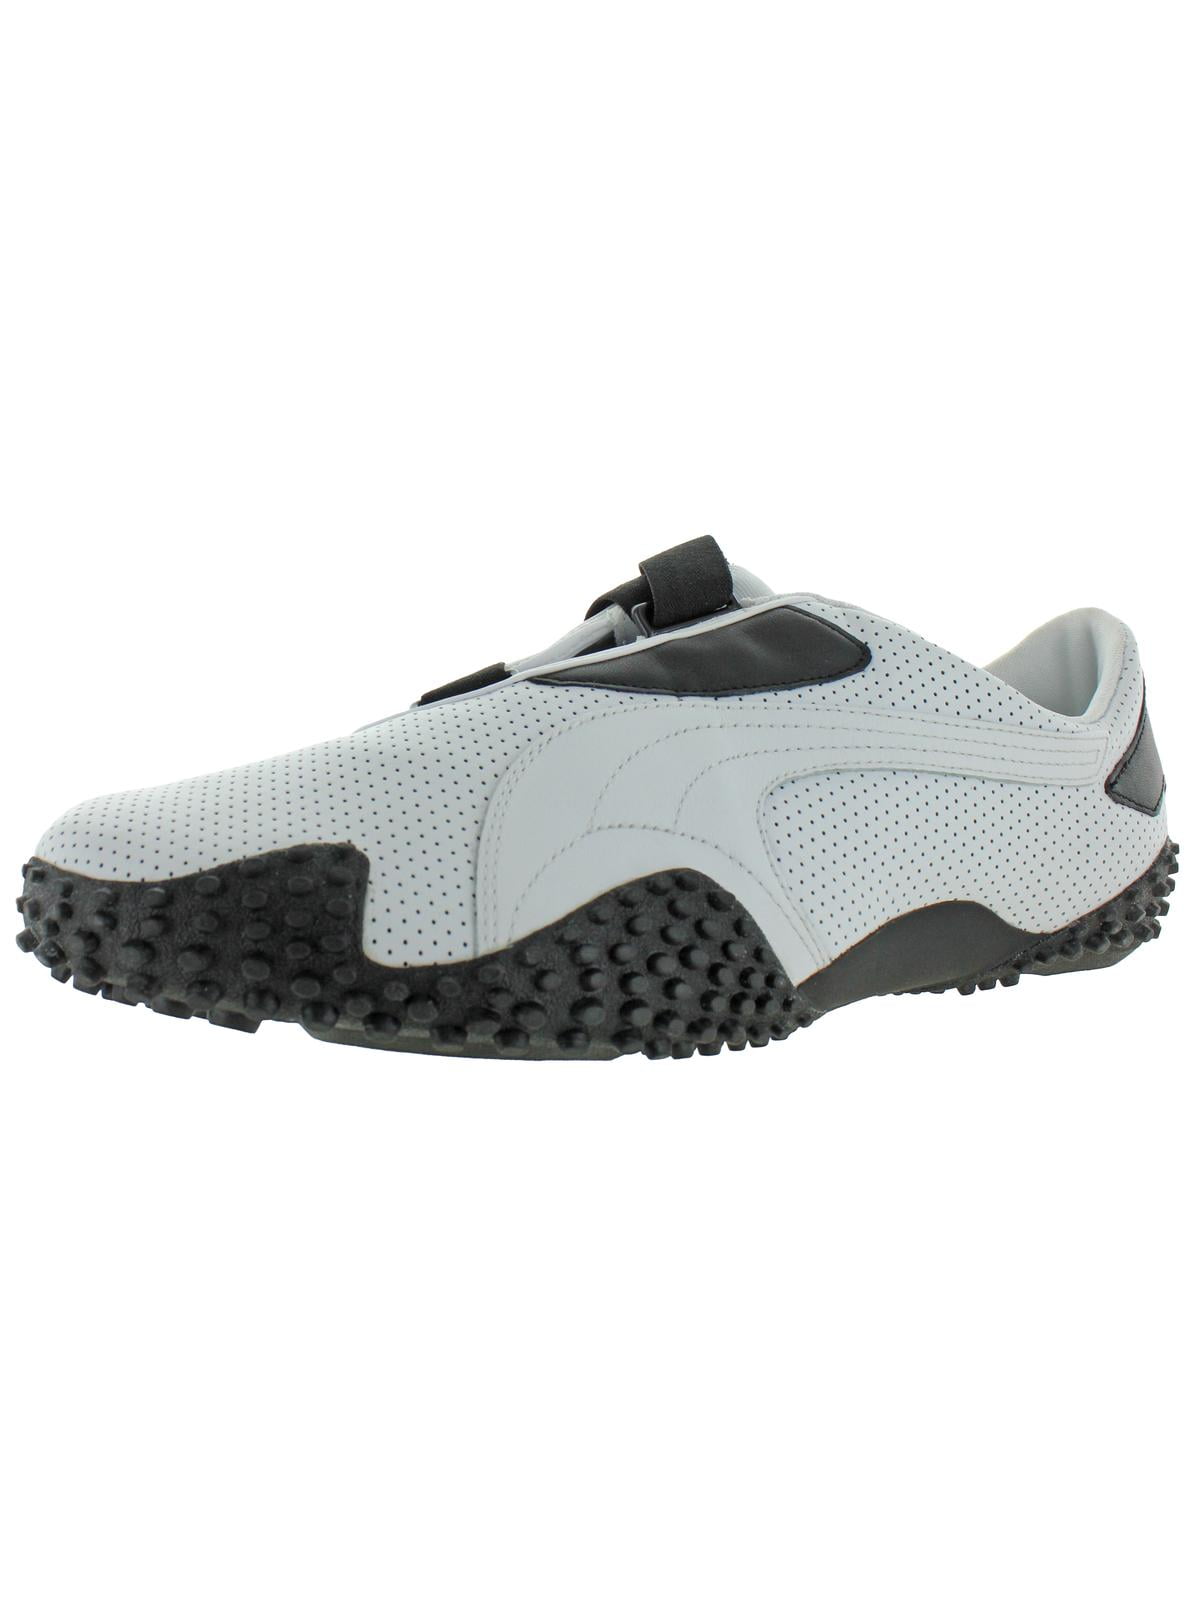 Puma Mens Mostro Perf Leather Low Top 